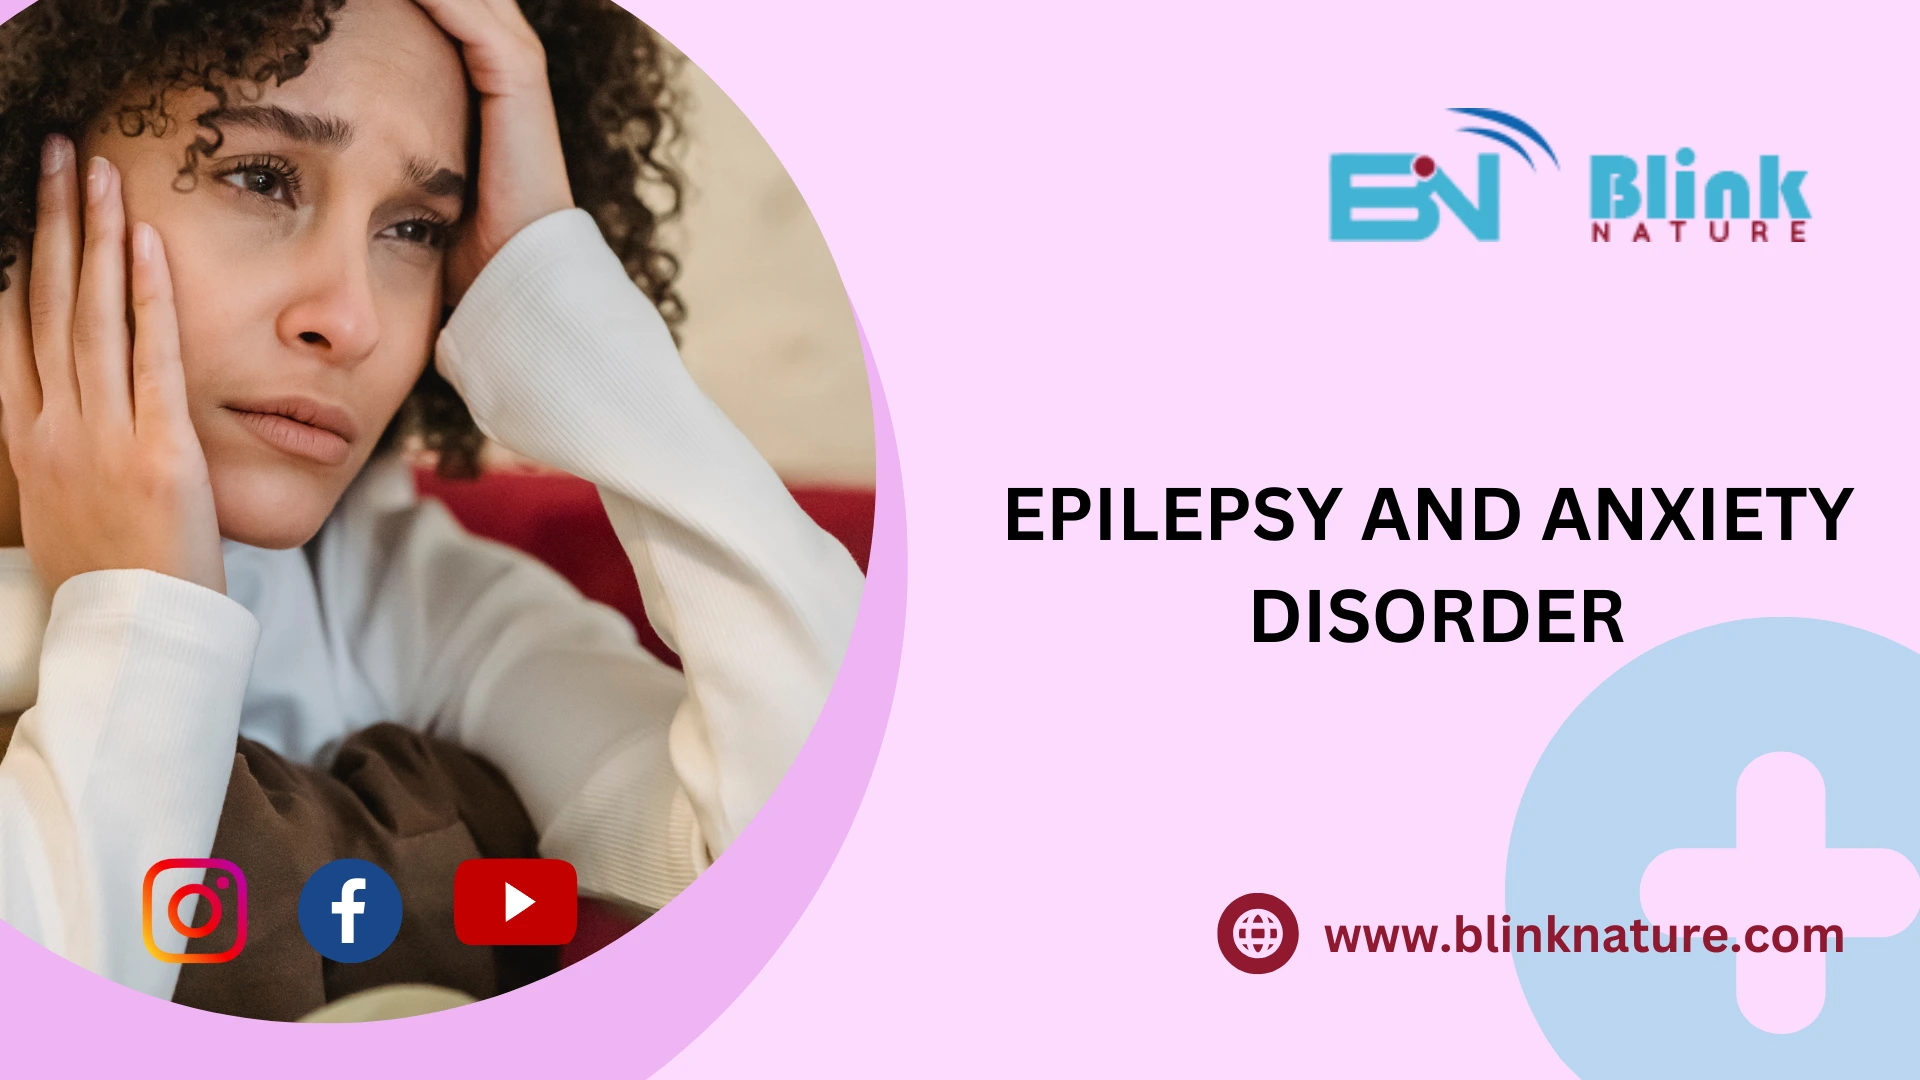 HOW DO YOU TREAT EPILEPSY AND ANXIETY DISORDER?